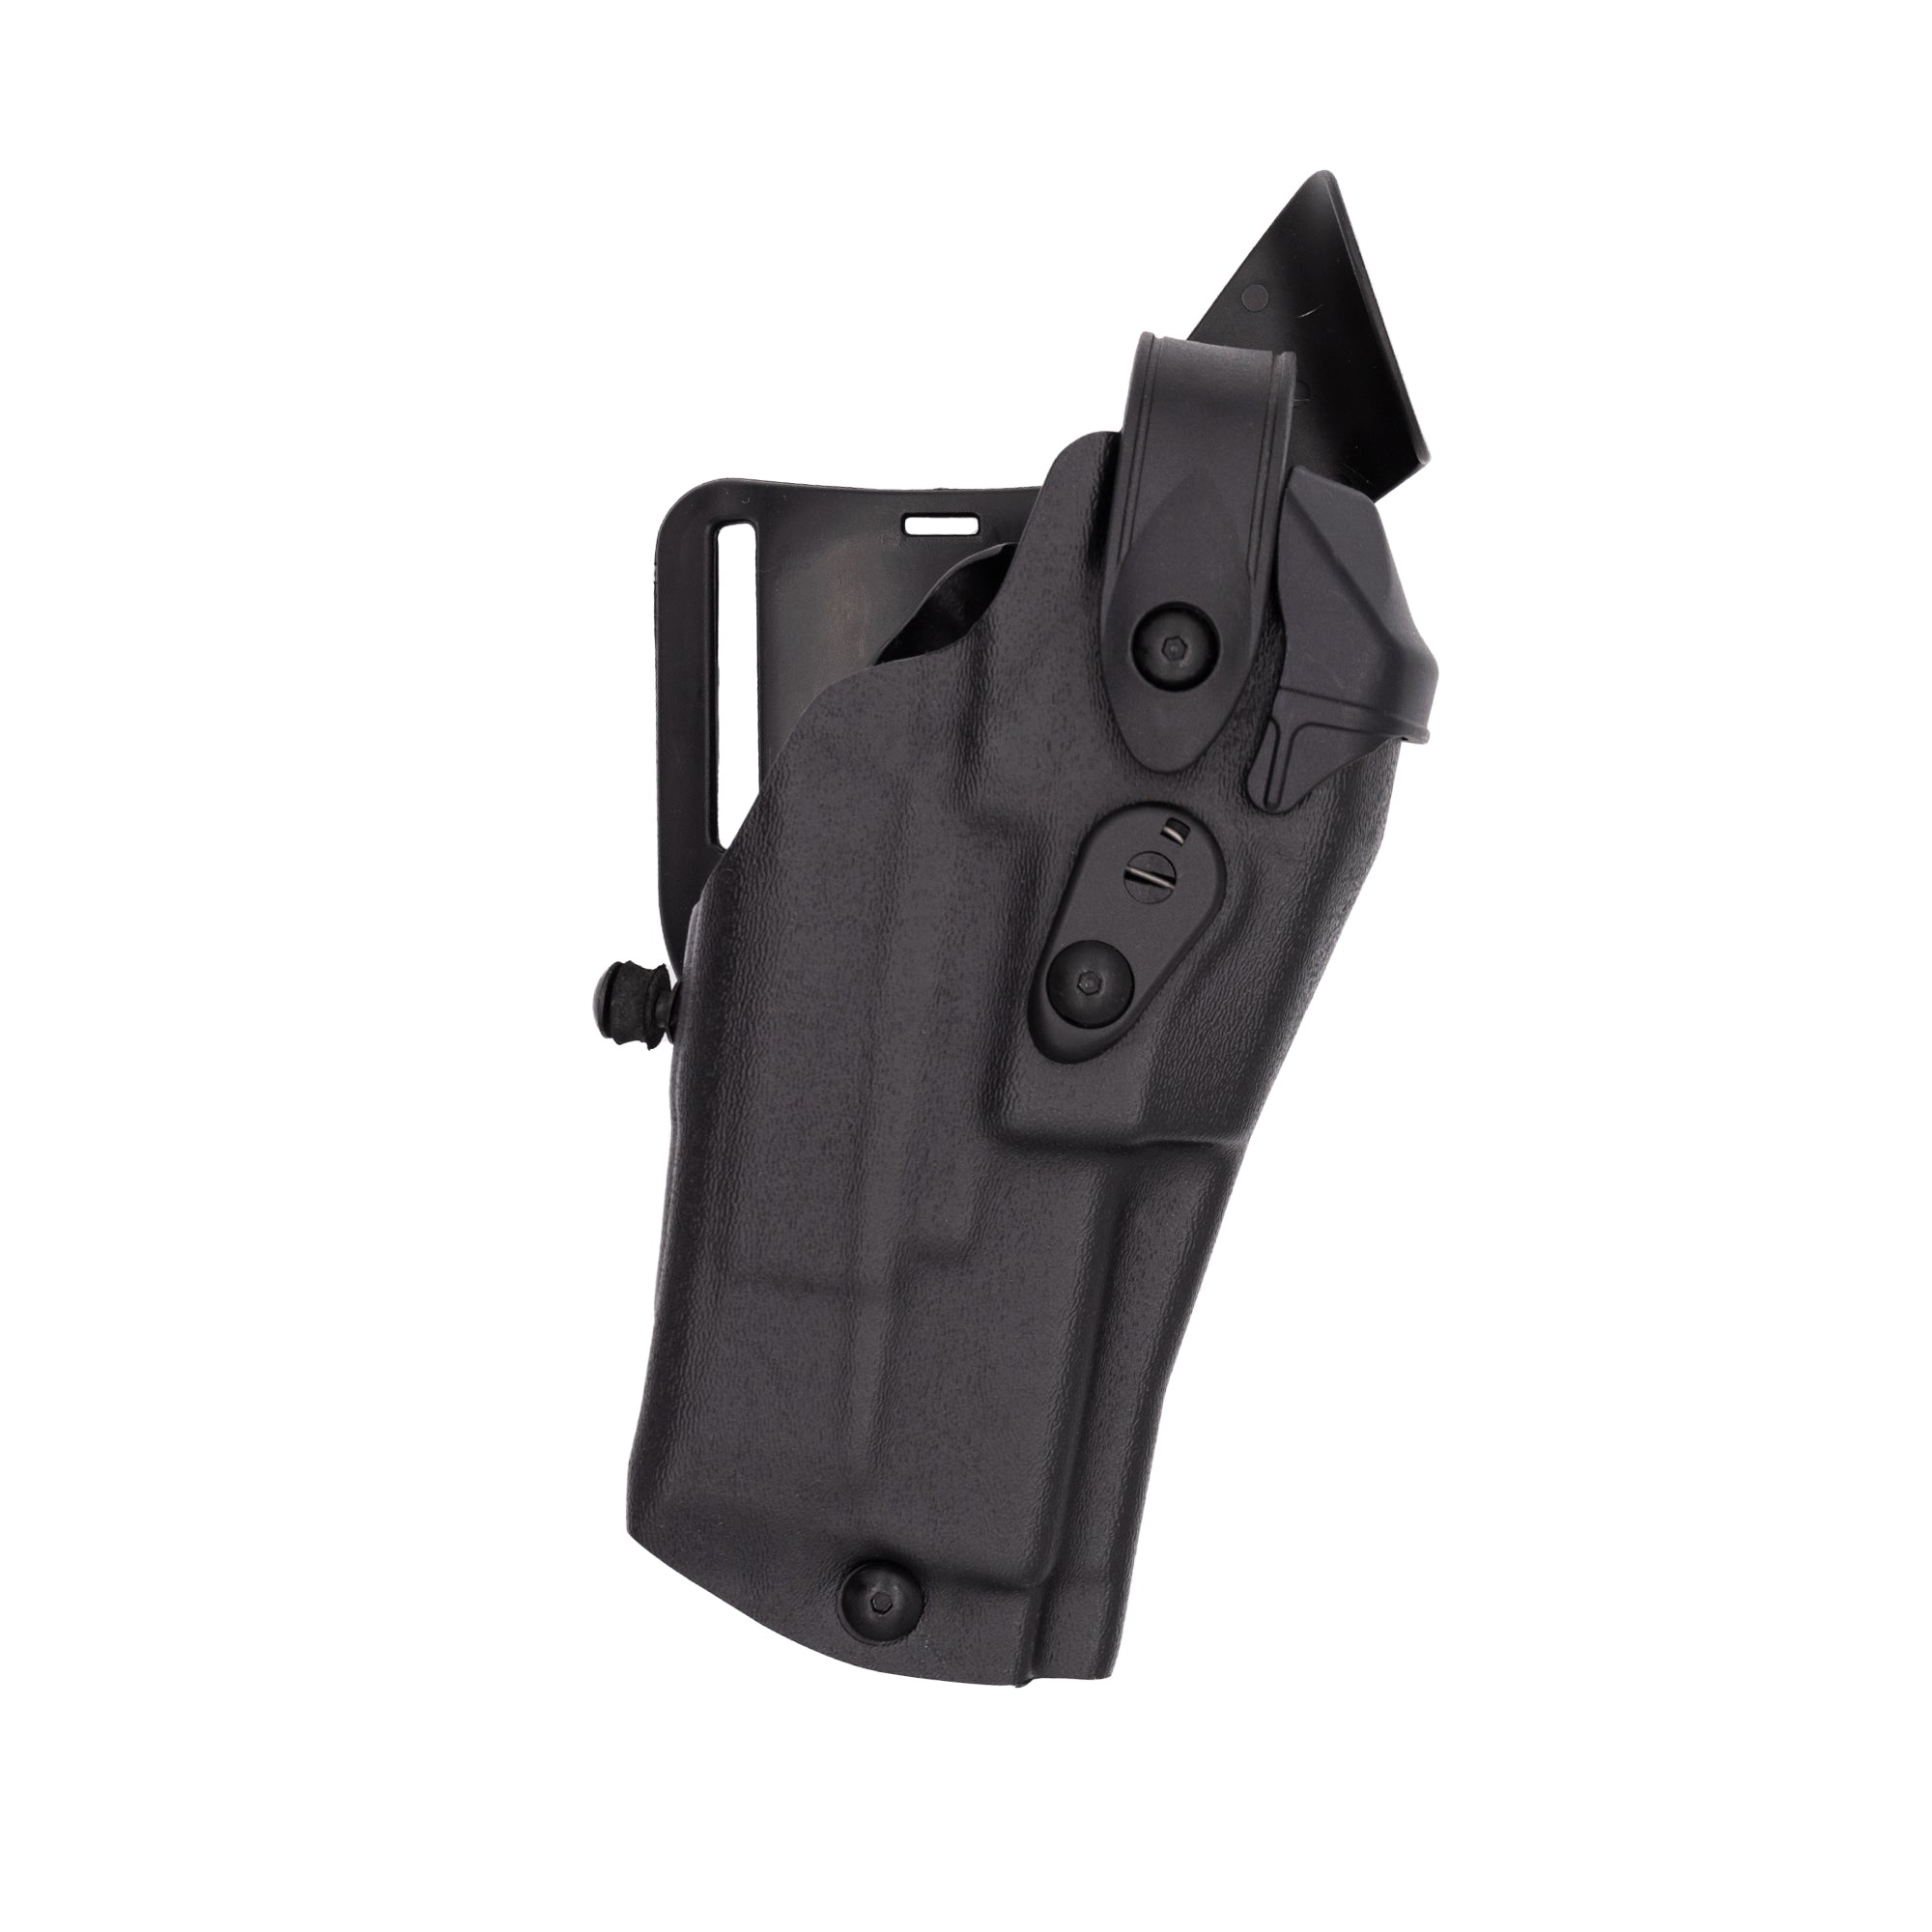  Safariland 6360 Duty Holster, Fits Glock 19/23, Level III  Retention™, STX Tactical Black, Right Hand : Gun Holsters : Sports &  Outdoors